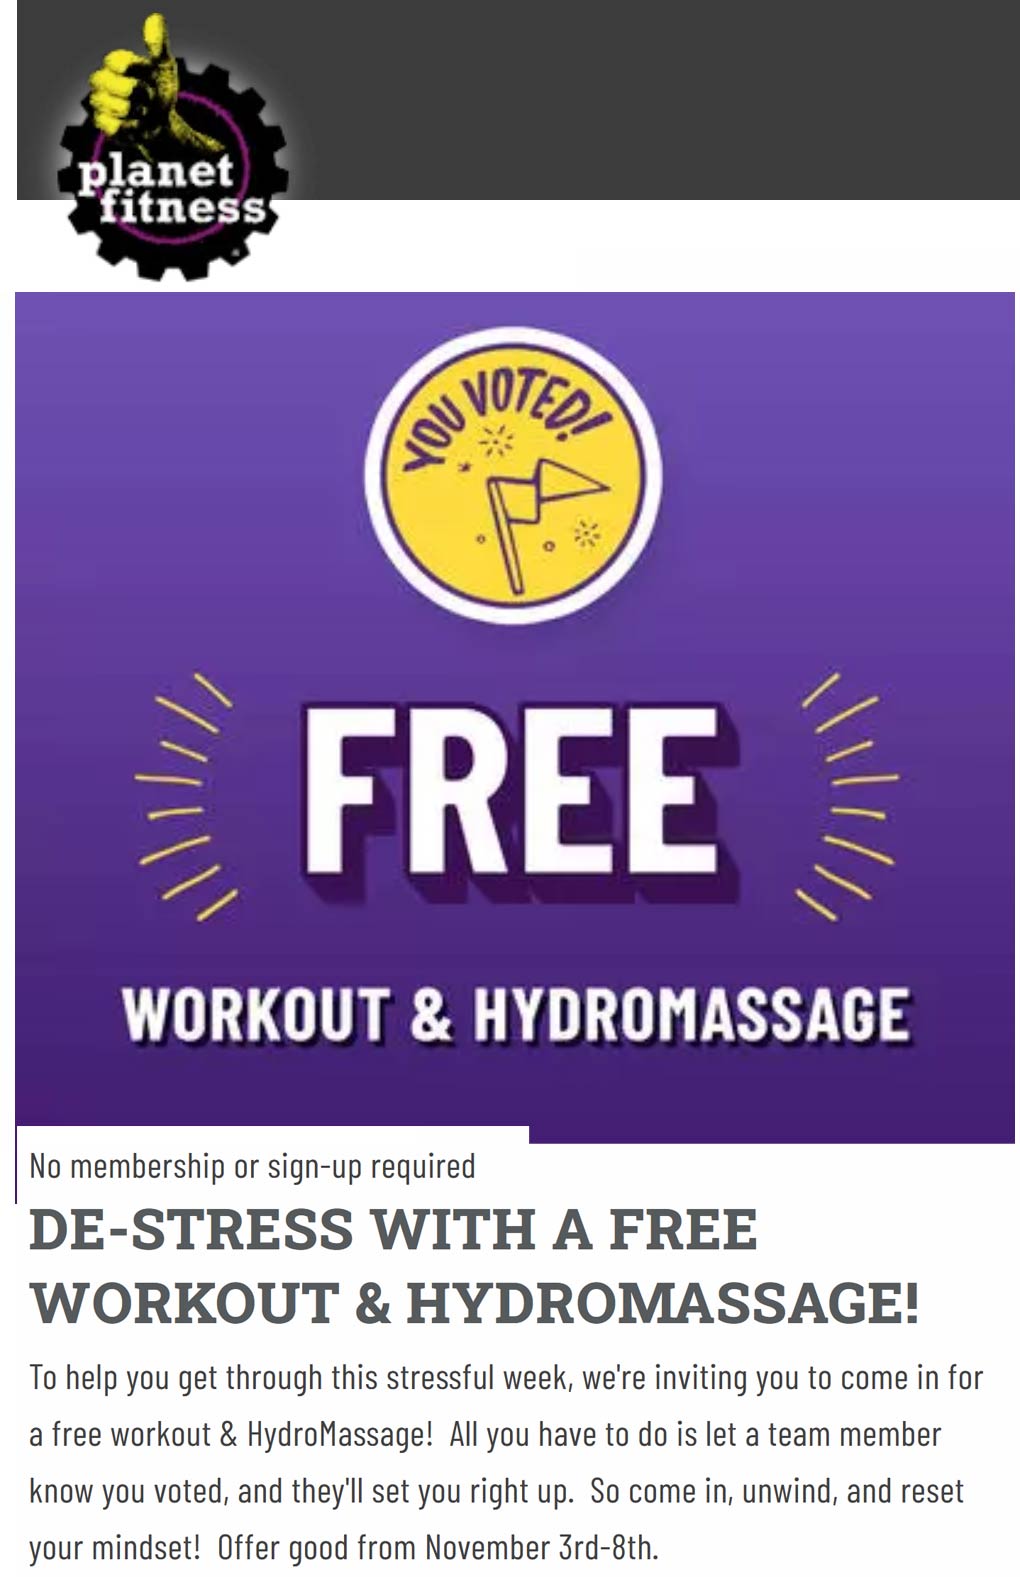 Planet Fitness stores Coupon  Free hydromassage + workout at Planet Fitness gyms #planetfitness 